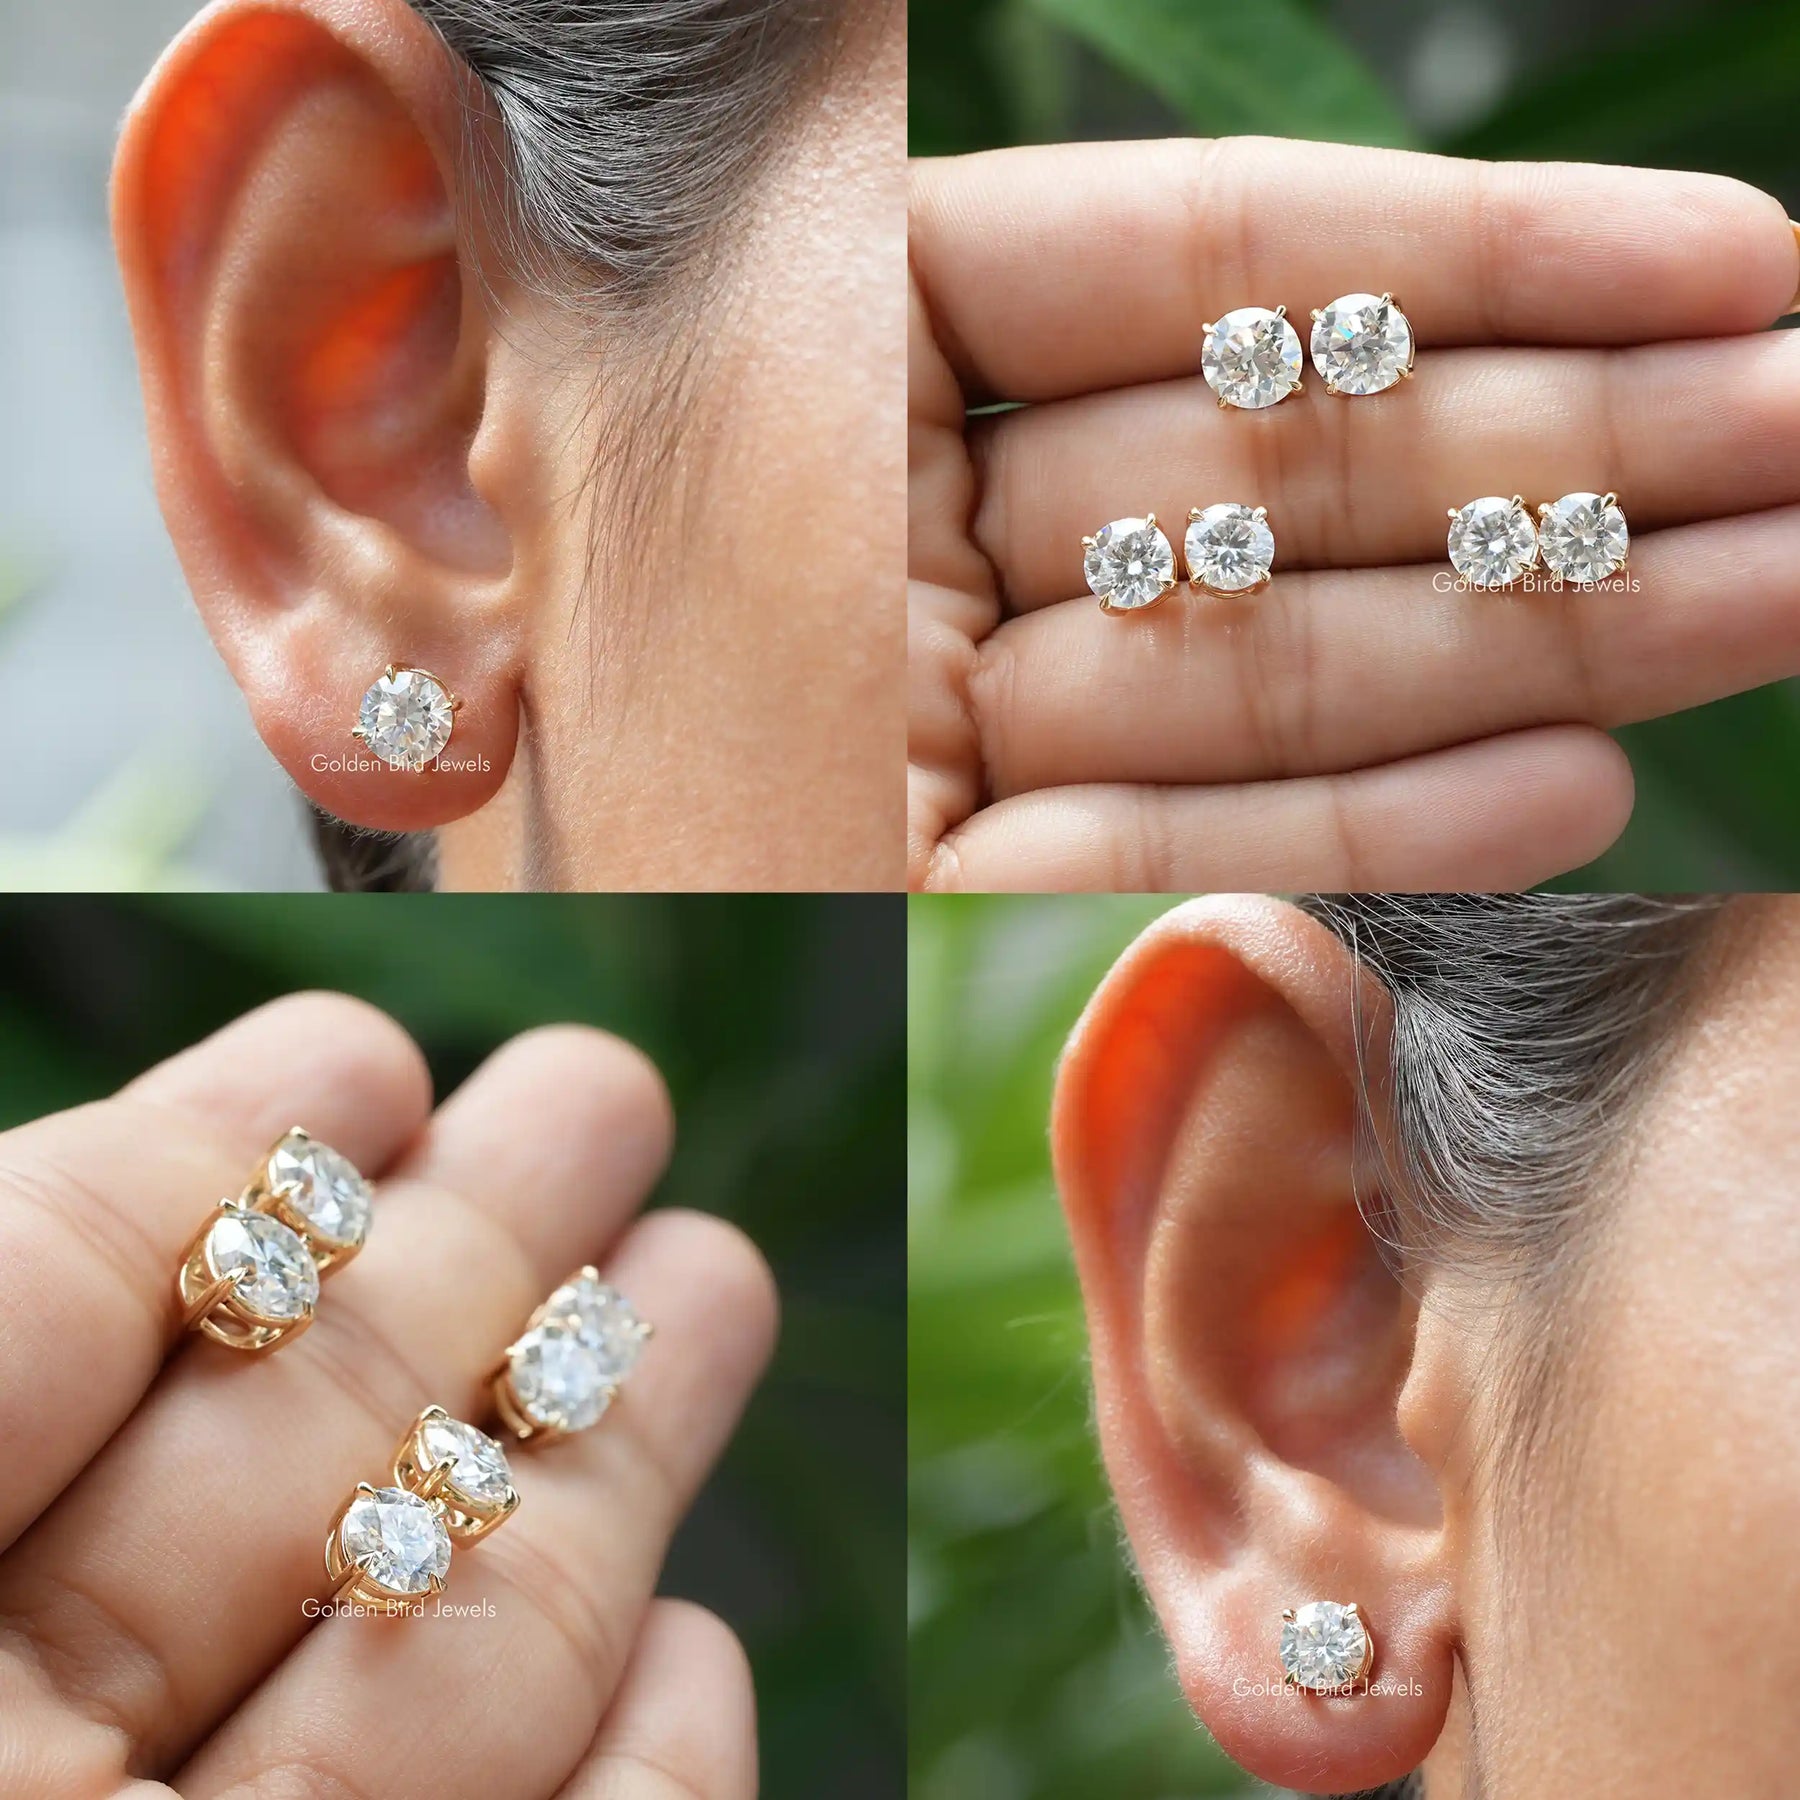 [Collage of moissanite earrings made of 14k yellow gold]-[Golden Bird Jewels]